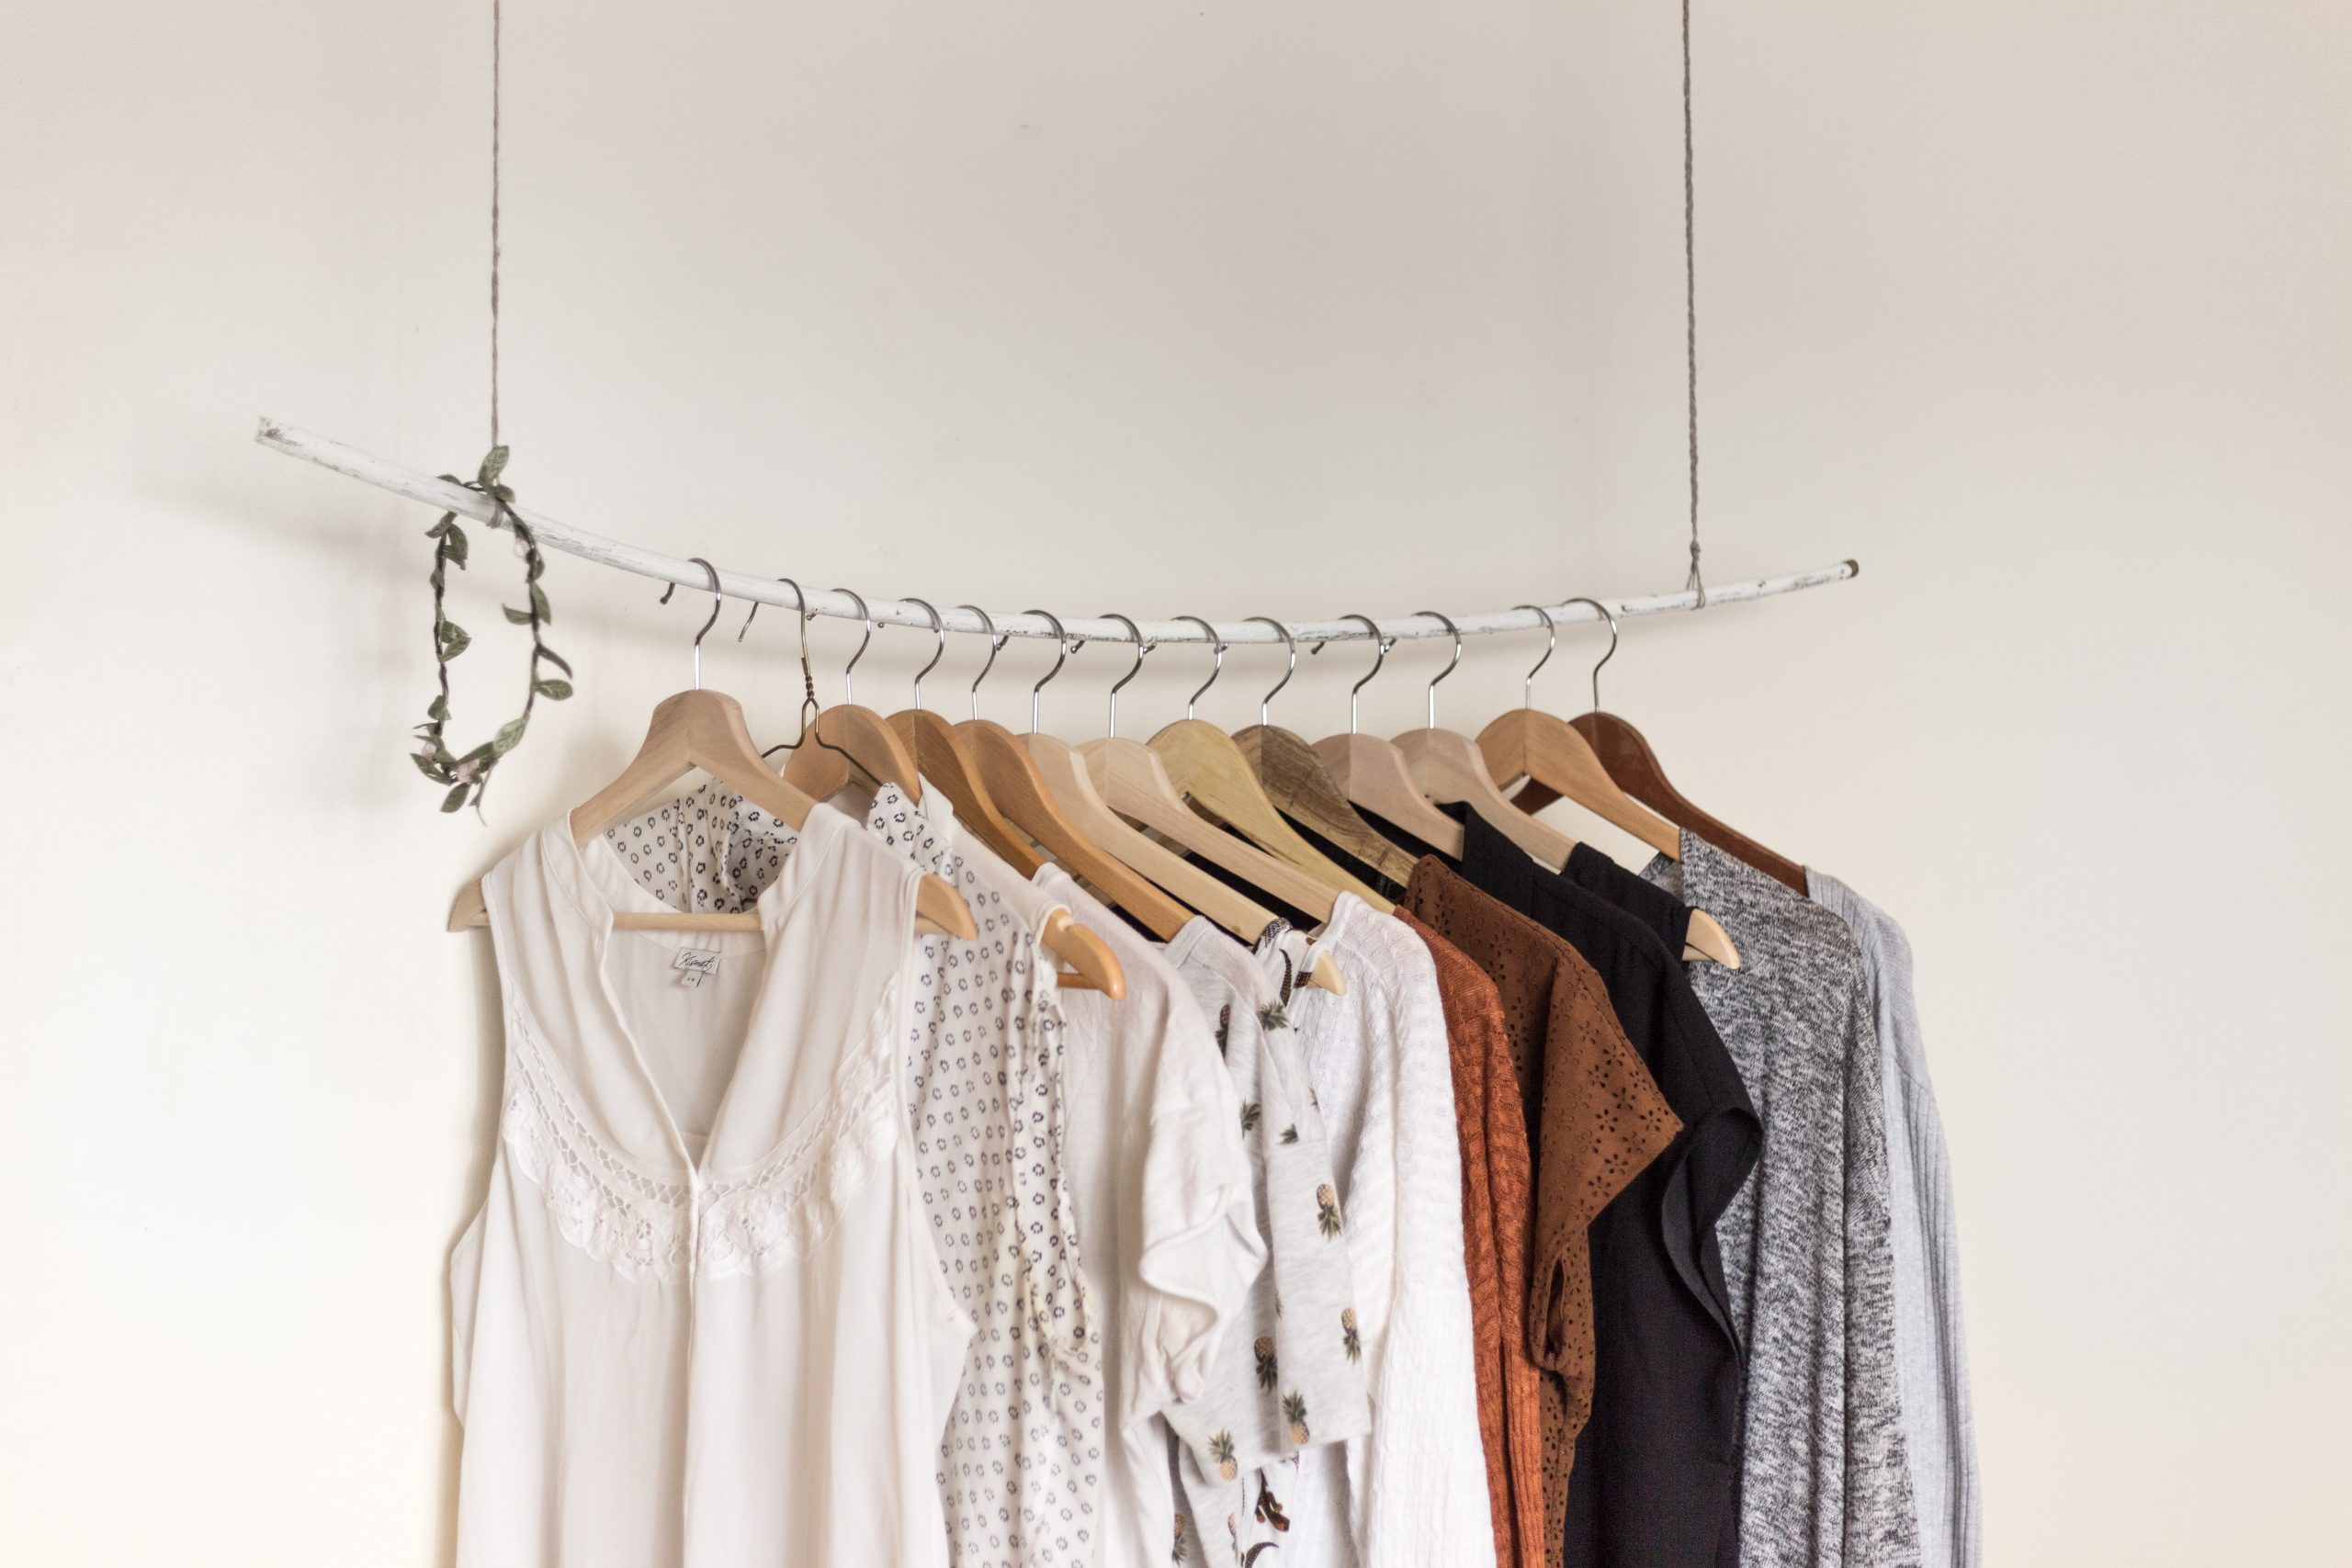 Pieces of clothing on coat hangers hung in a row against a white background